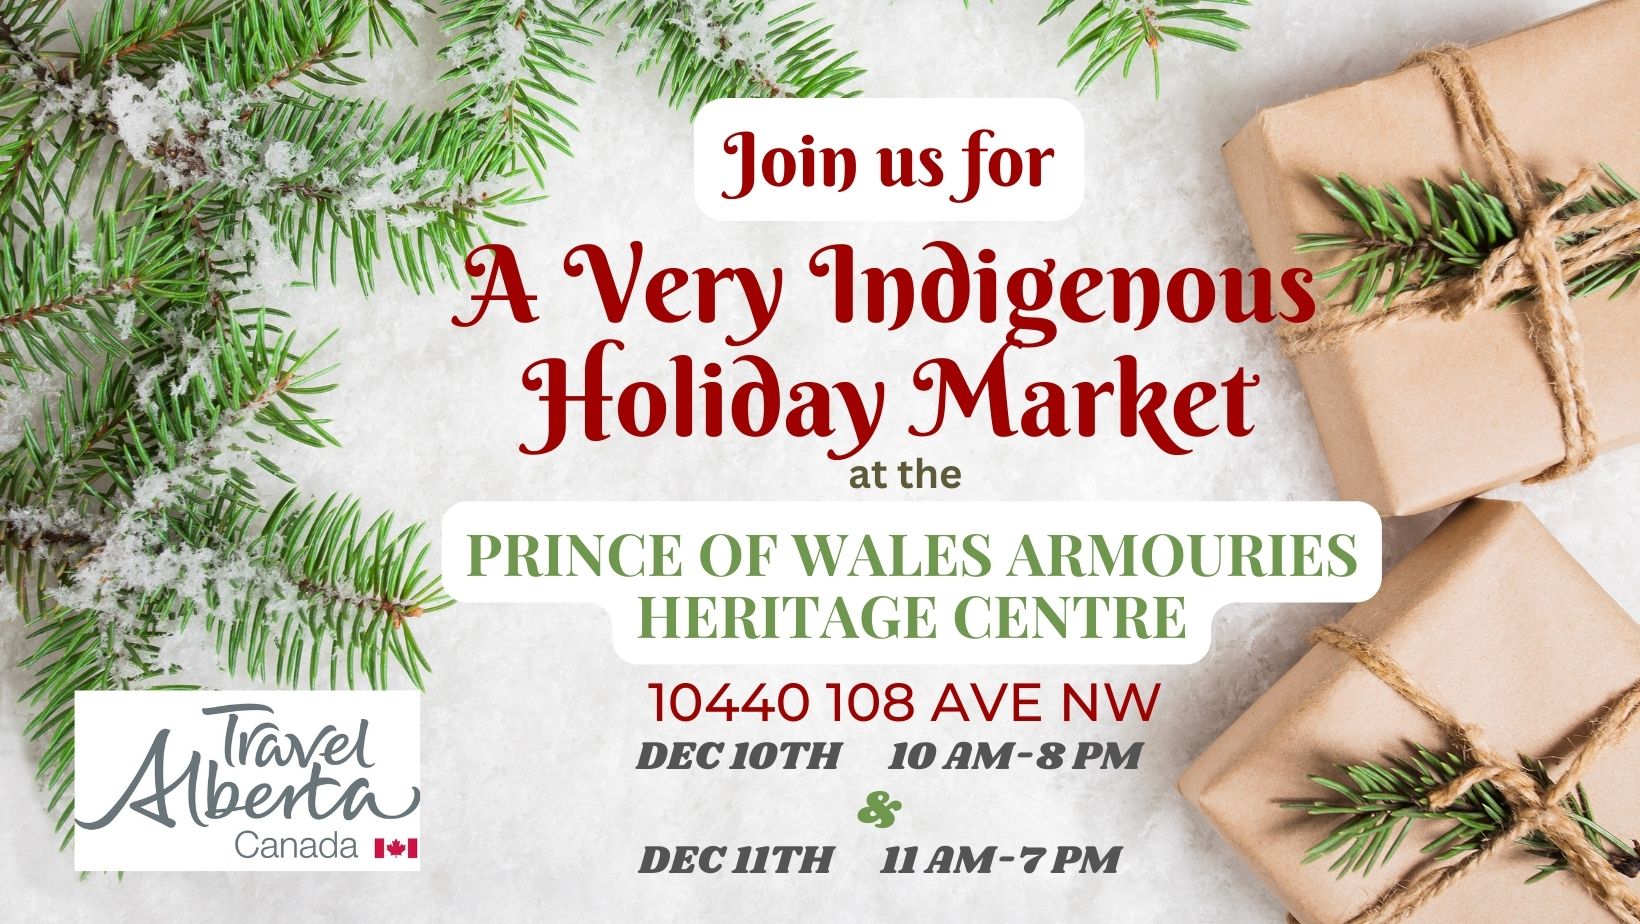 Featured image for “A Very Indigenous Holiday Market at Prince of Wales Armouries”